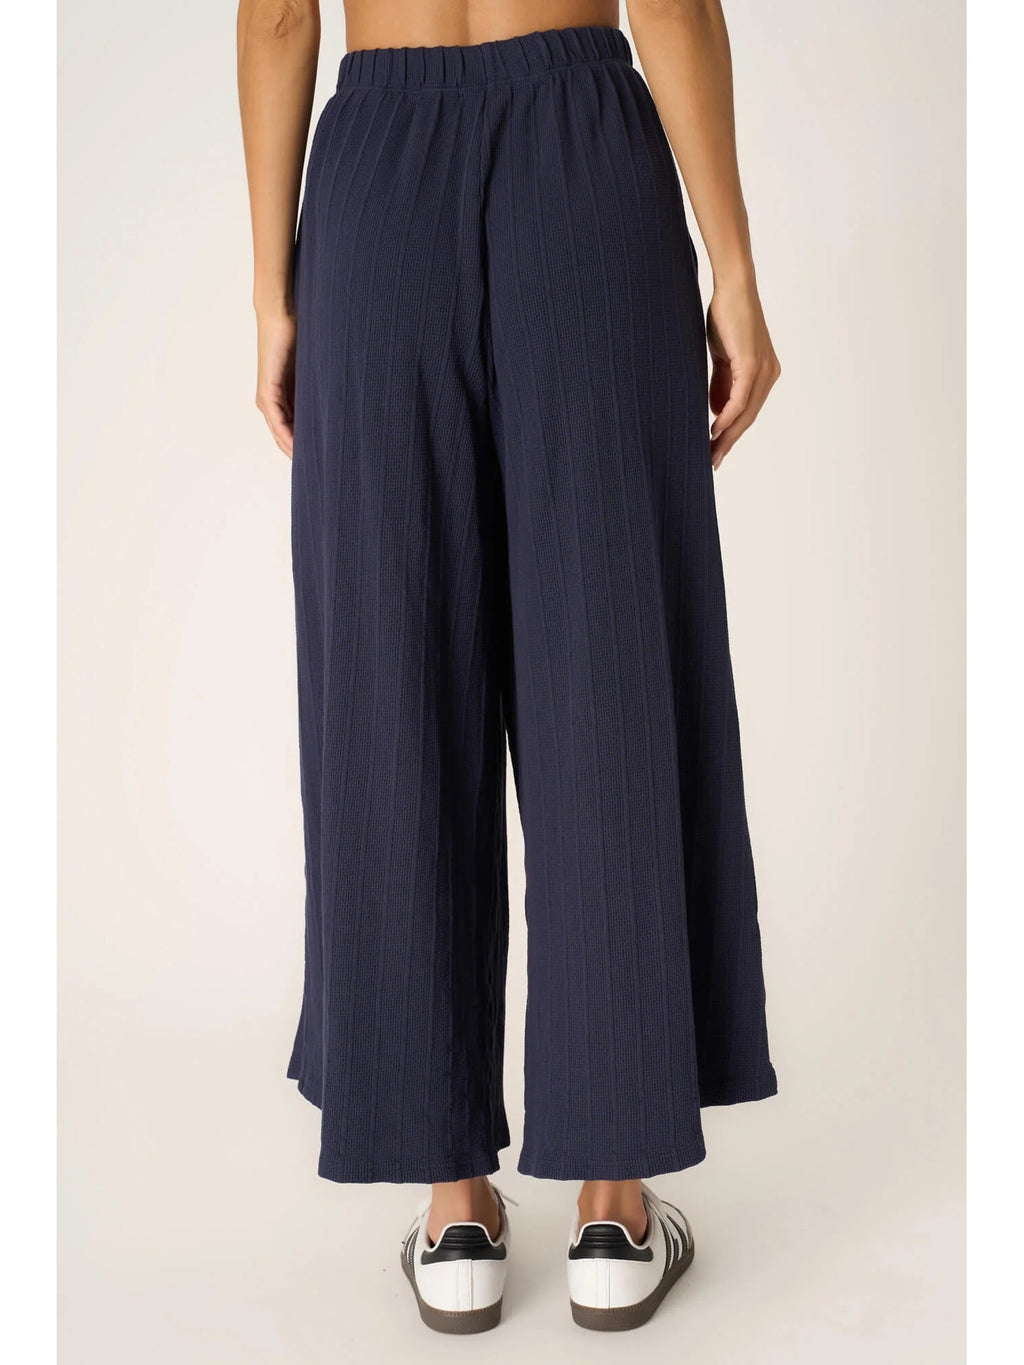 Project Social Come Together Textured Wide Leg Pant